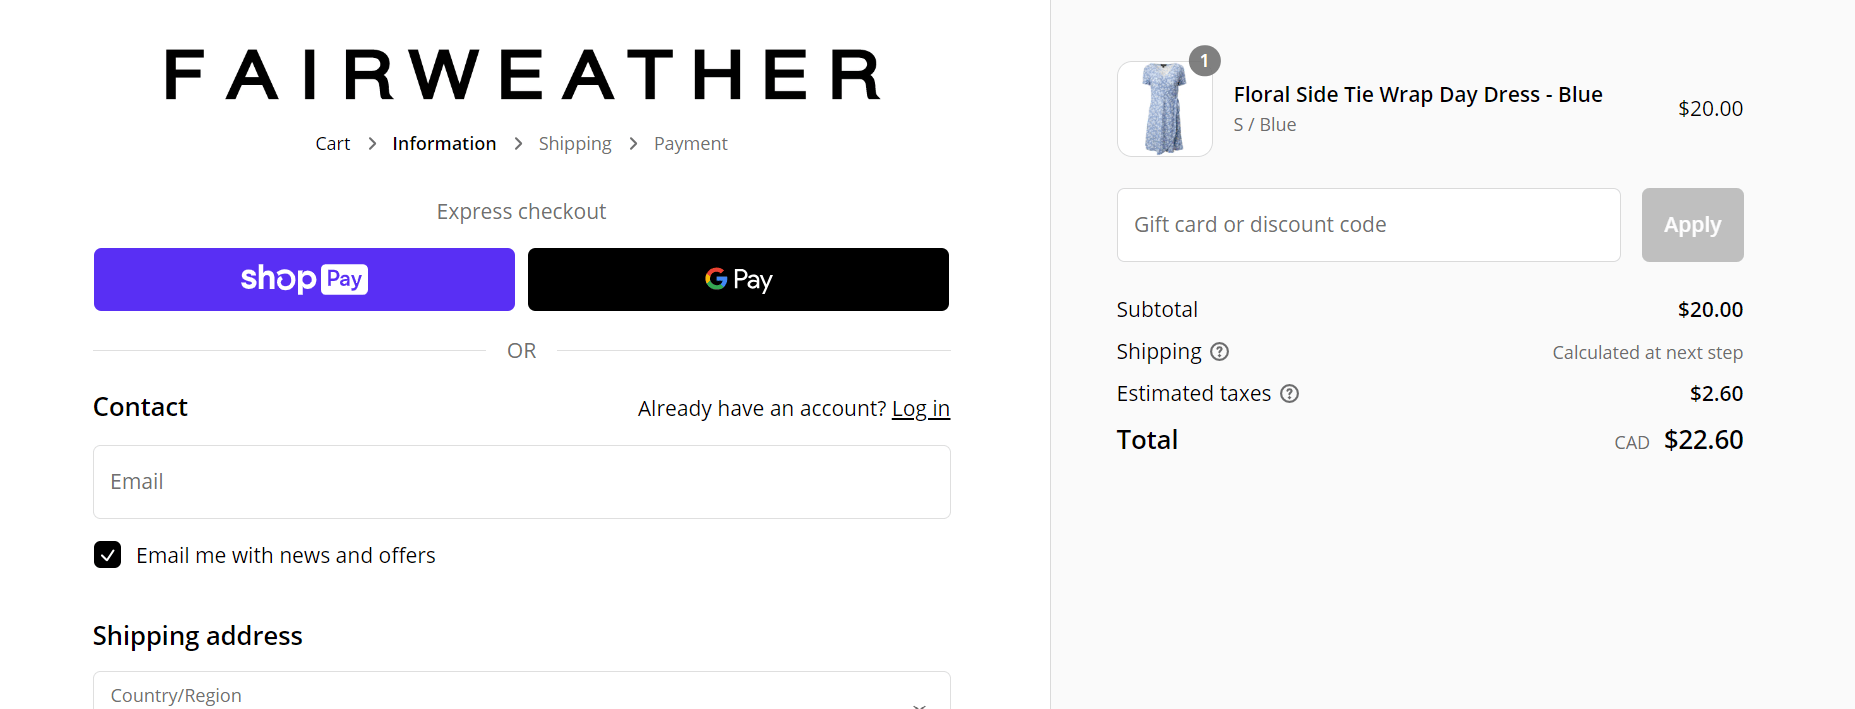 How To Use Fairweather Clothing Promo Code 2